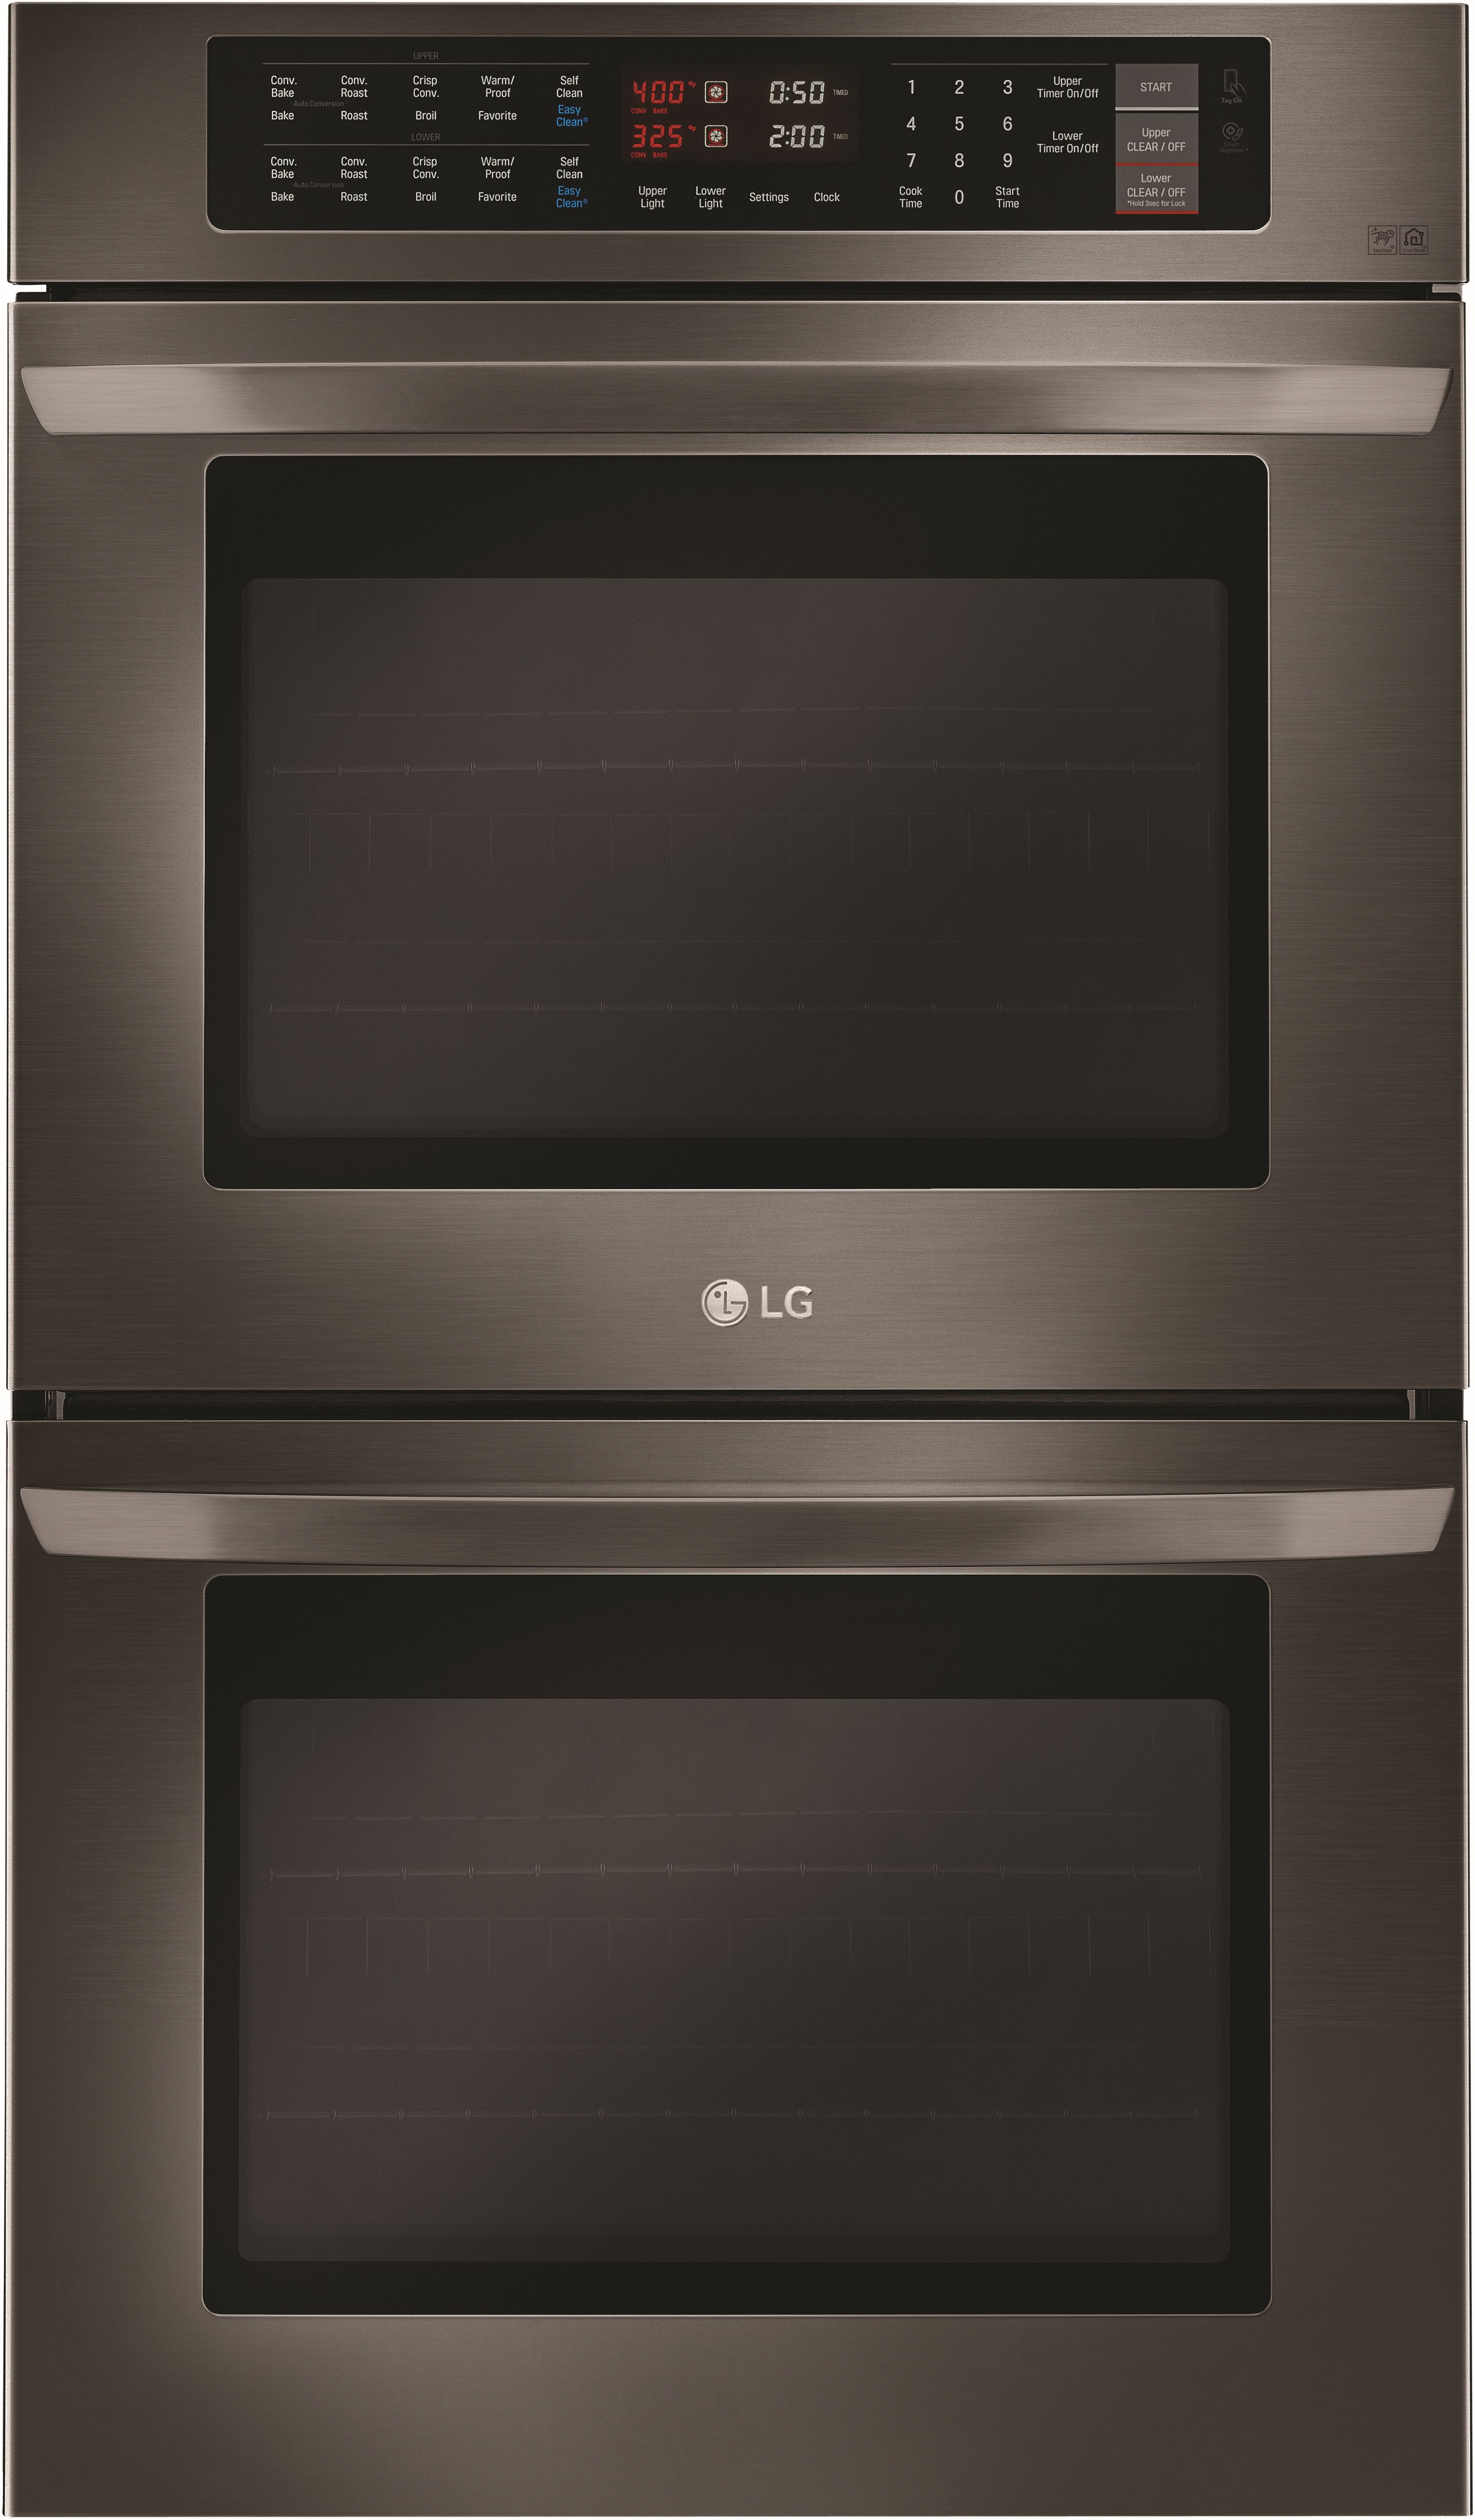 LG 30" Black Stainless Steel Double Electric Wall Oven